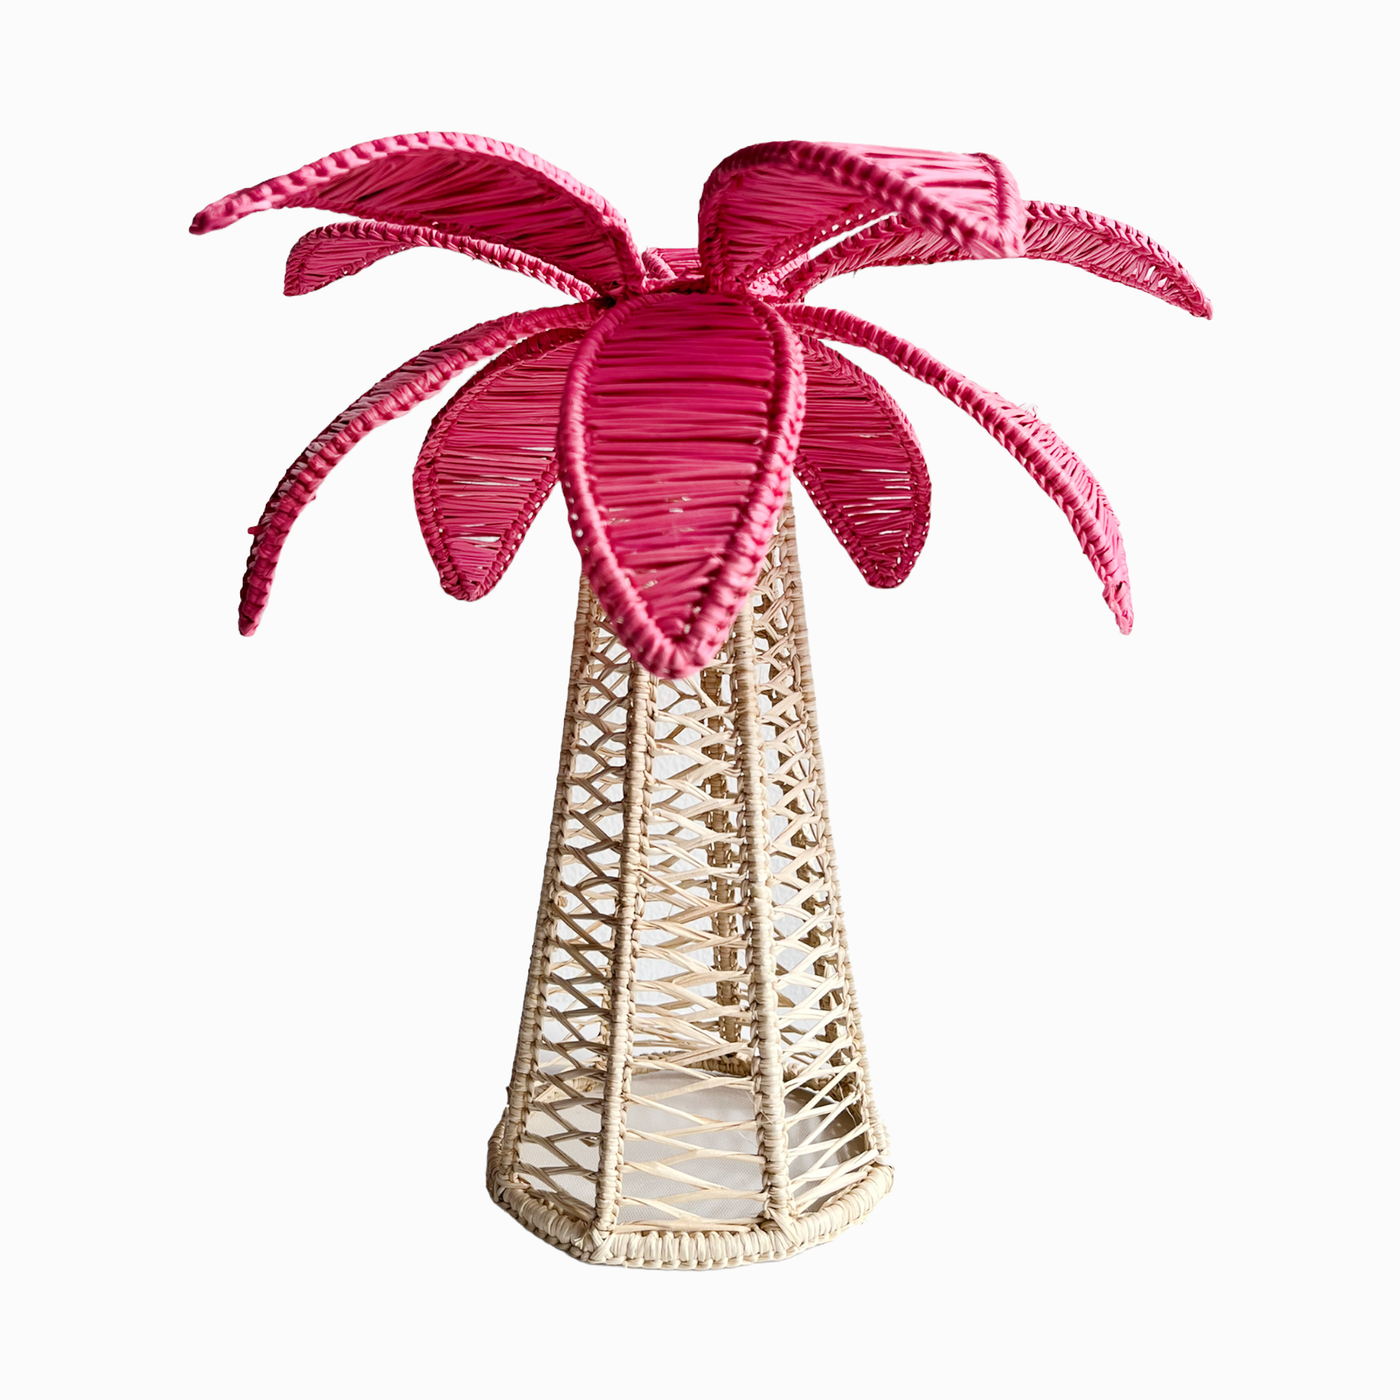 Palm Tree Candle Holder - Hot Pink Leaves